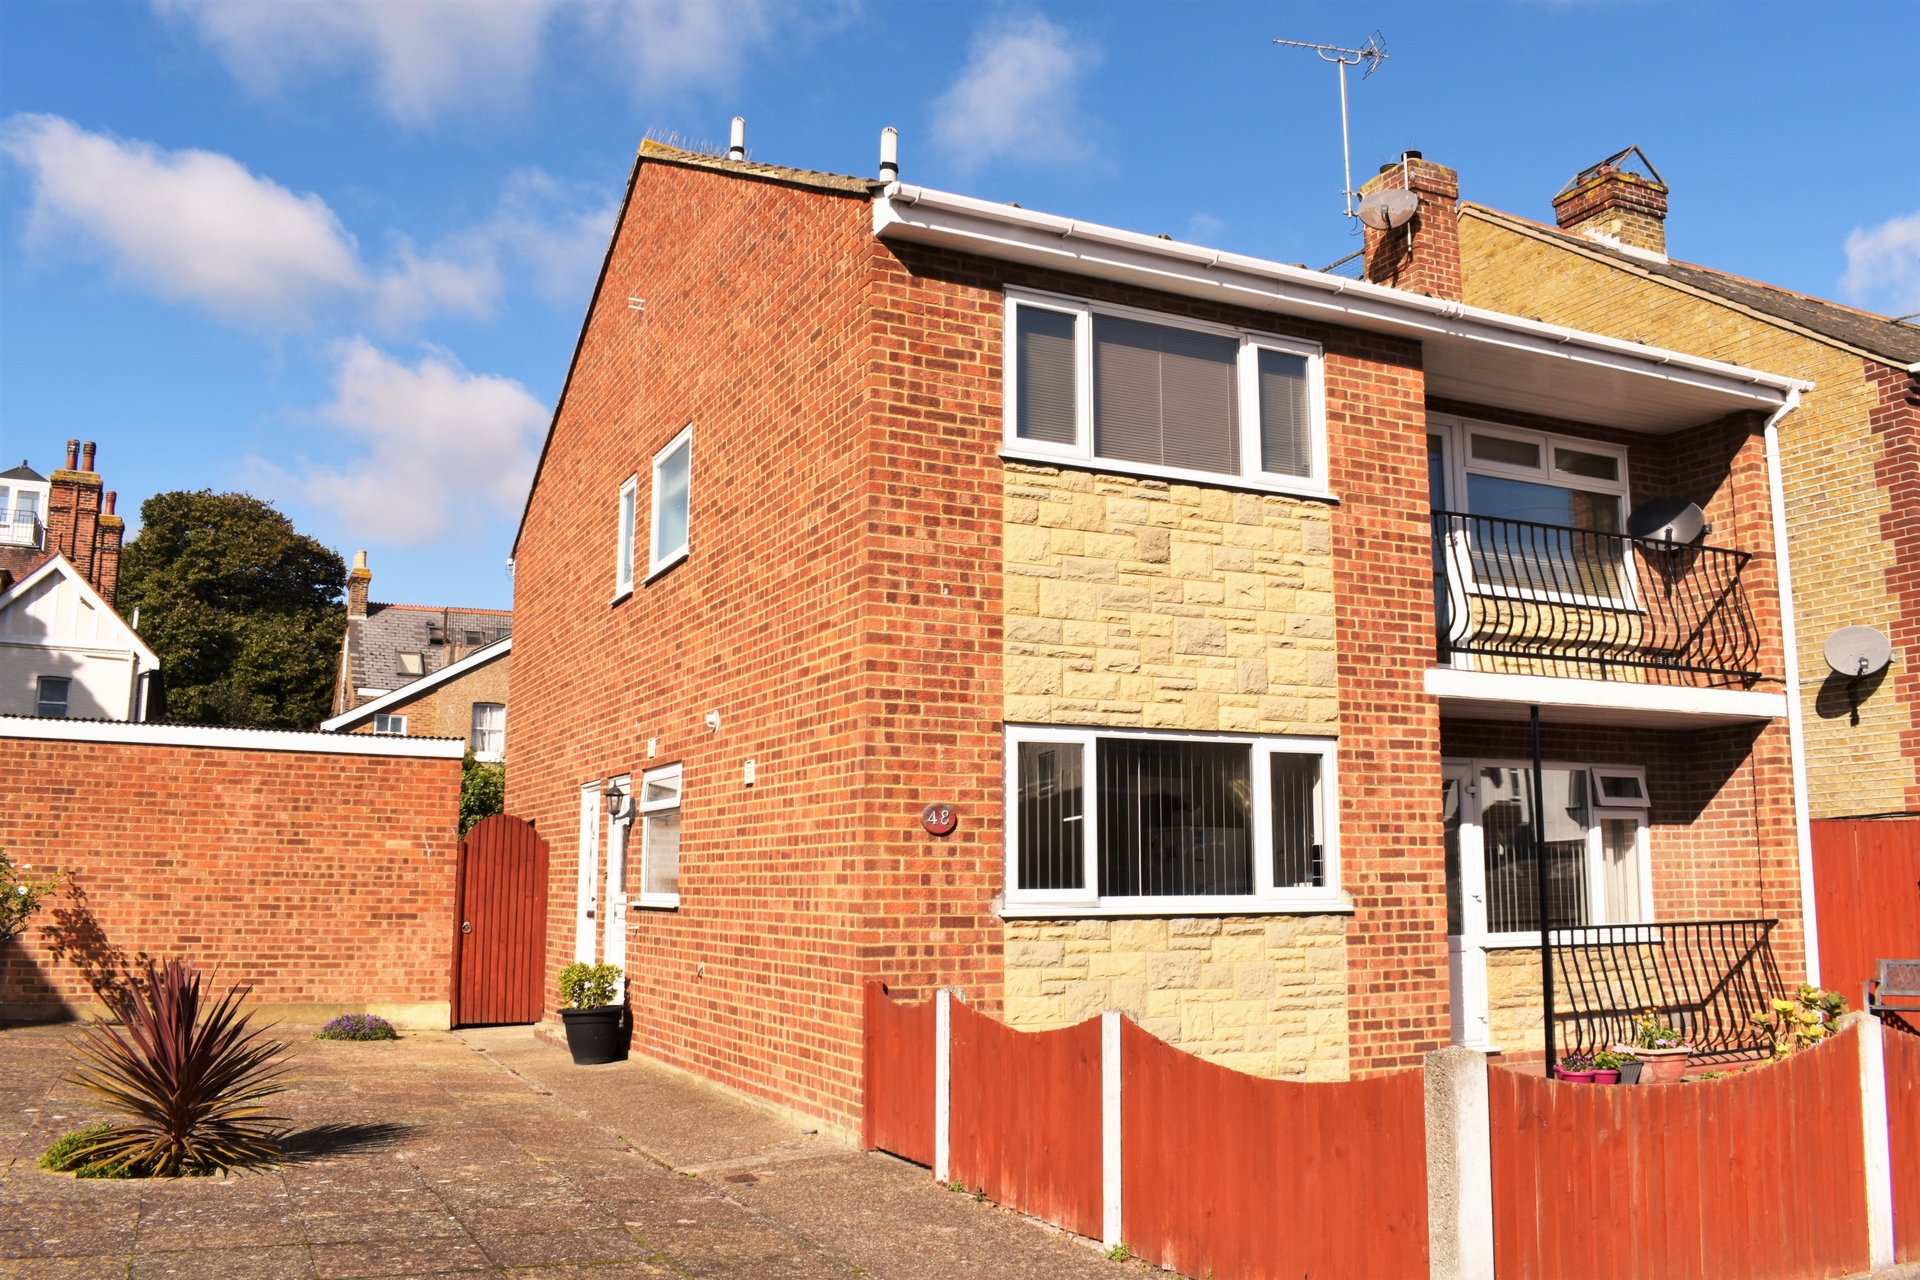 2 Bed Maisonette located in the heart of Broadstairs! Available now! �895 pcm.